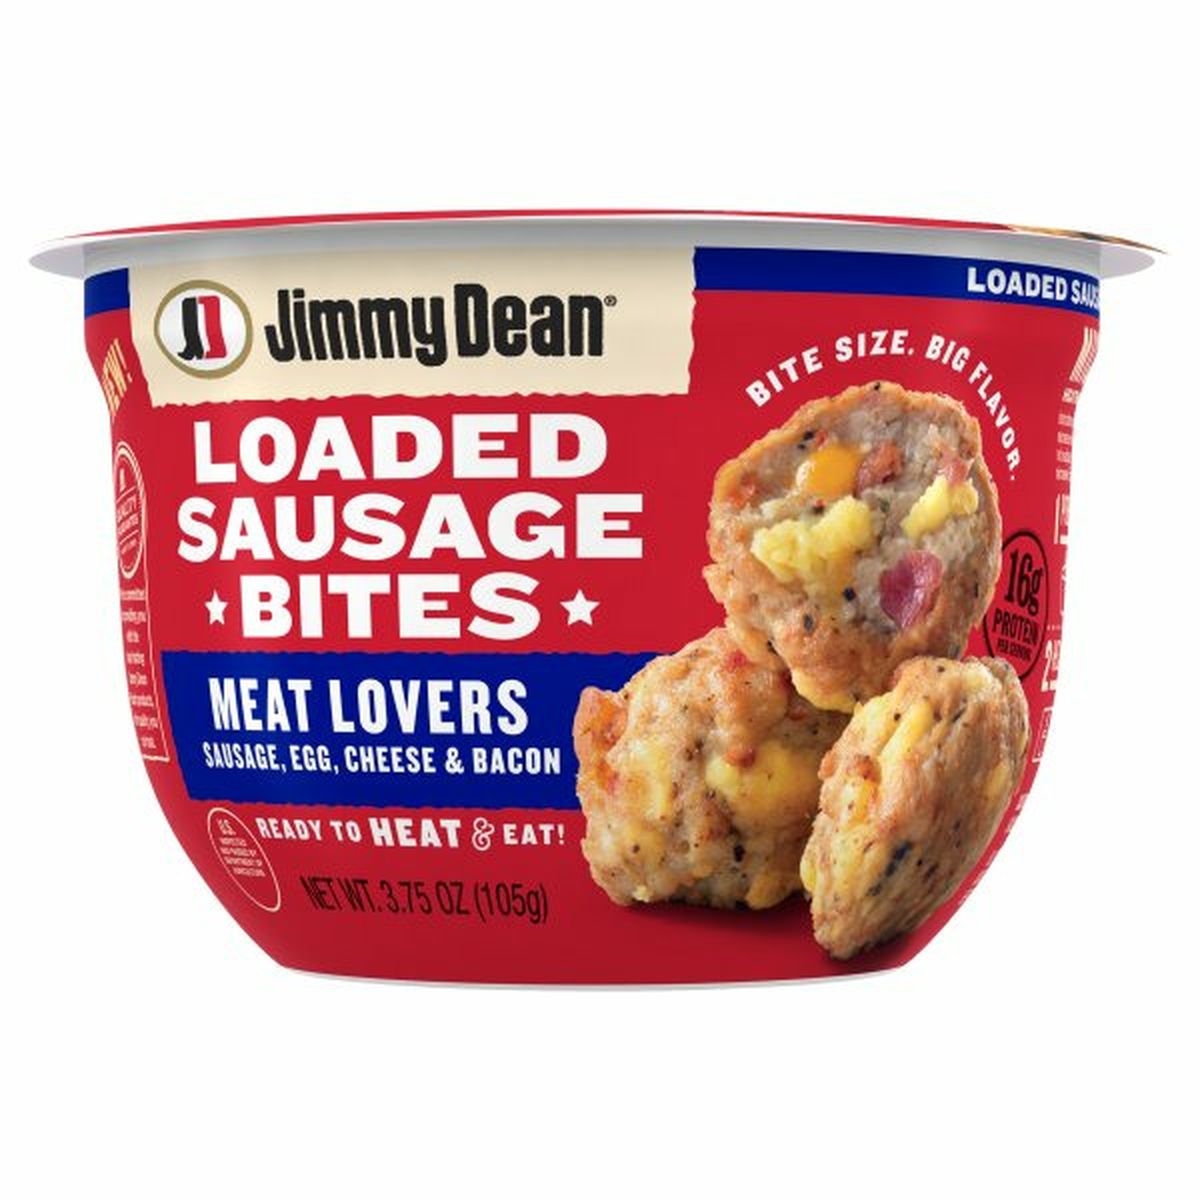 Calories in Jimmy Dean Meat Lovers Loaded Sausage Bites, 3.75 oz